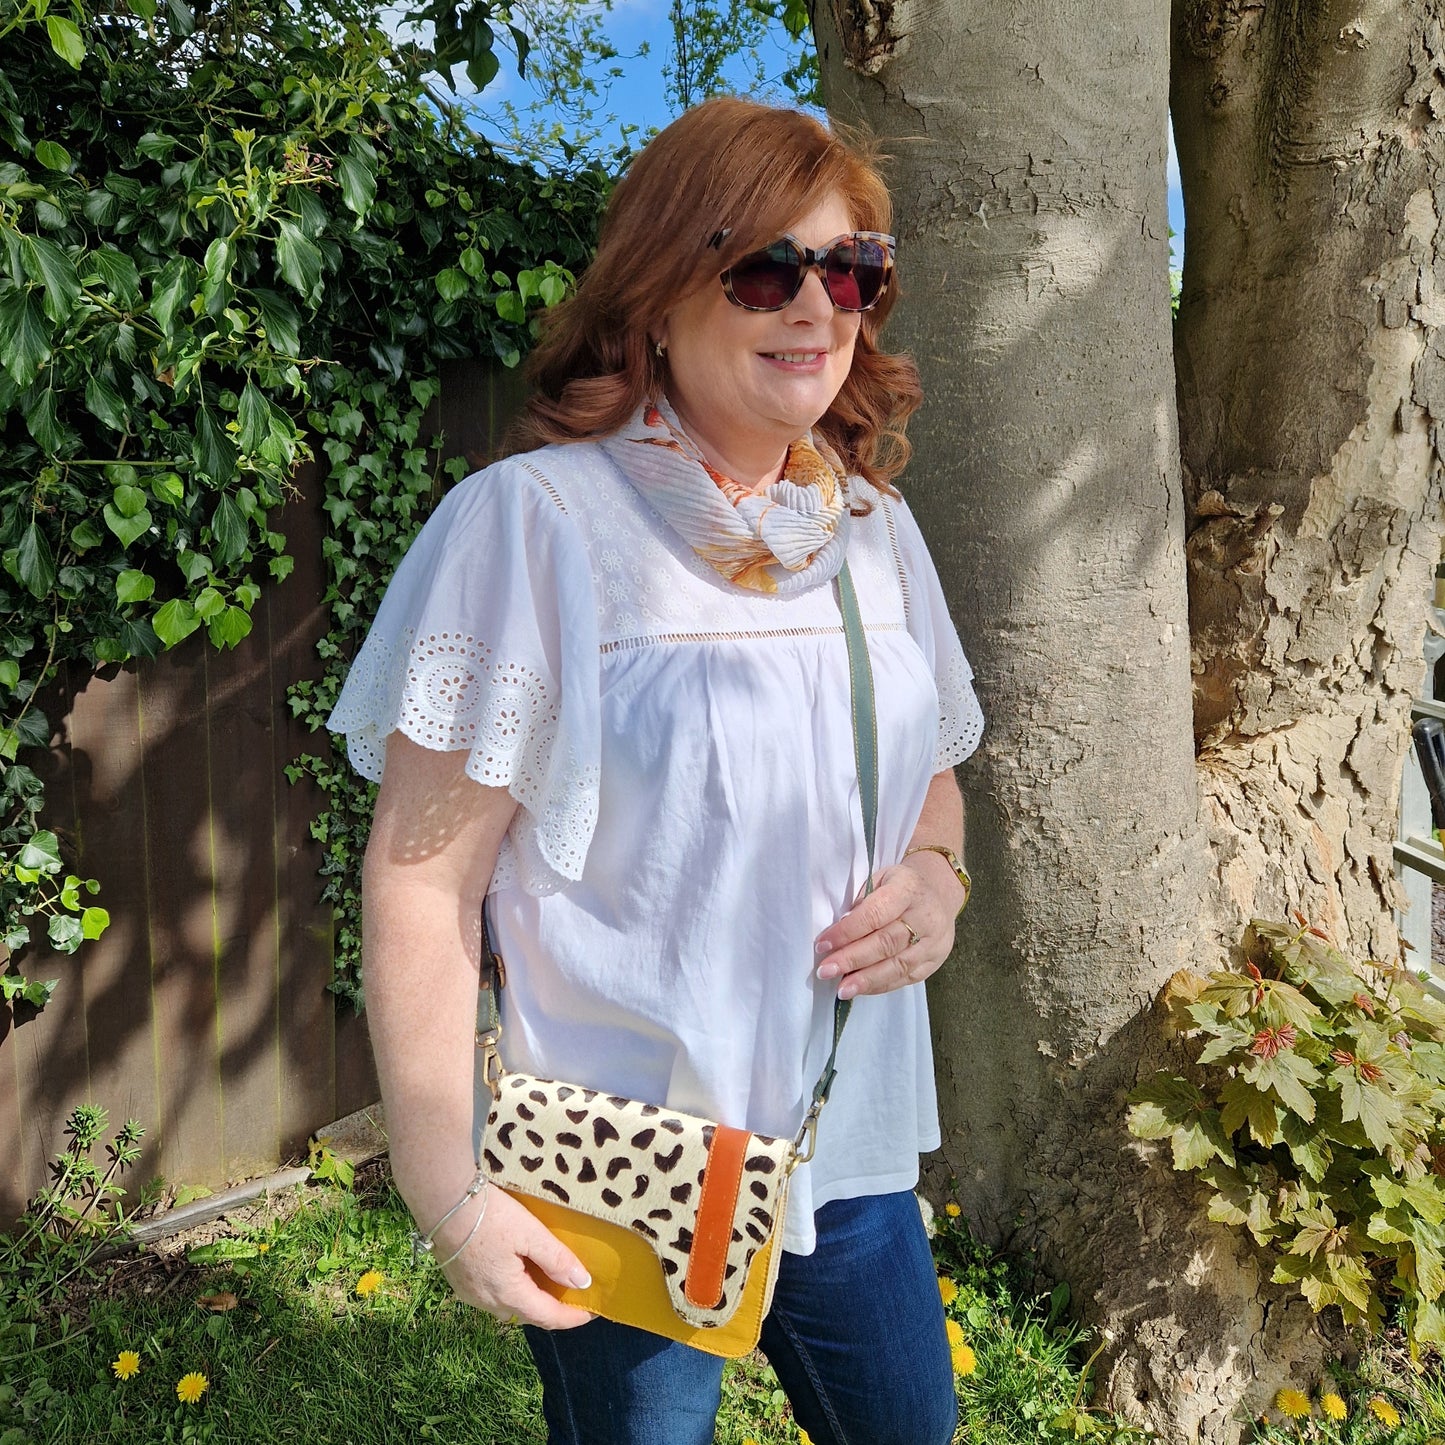 Lady wearing a yellow leather cross body bag.